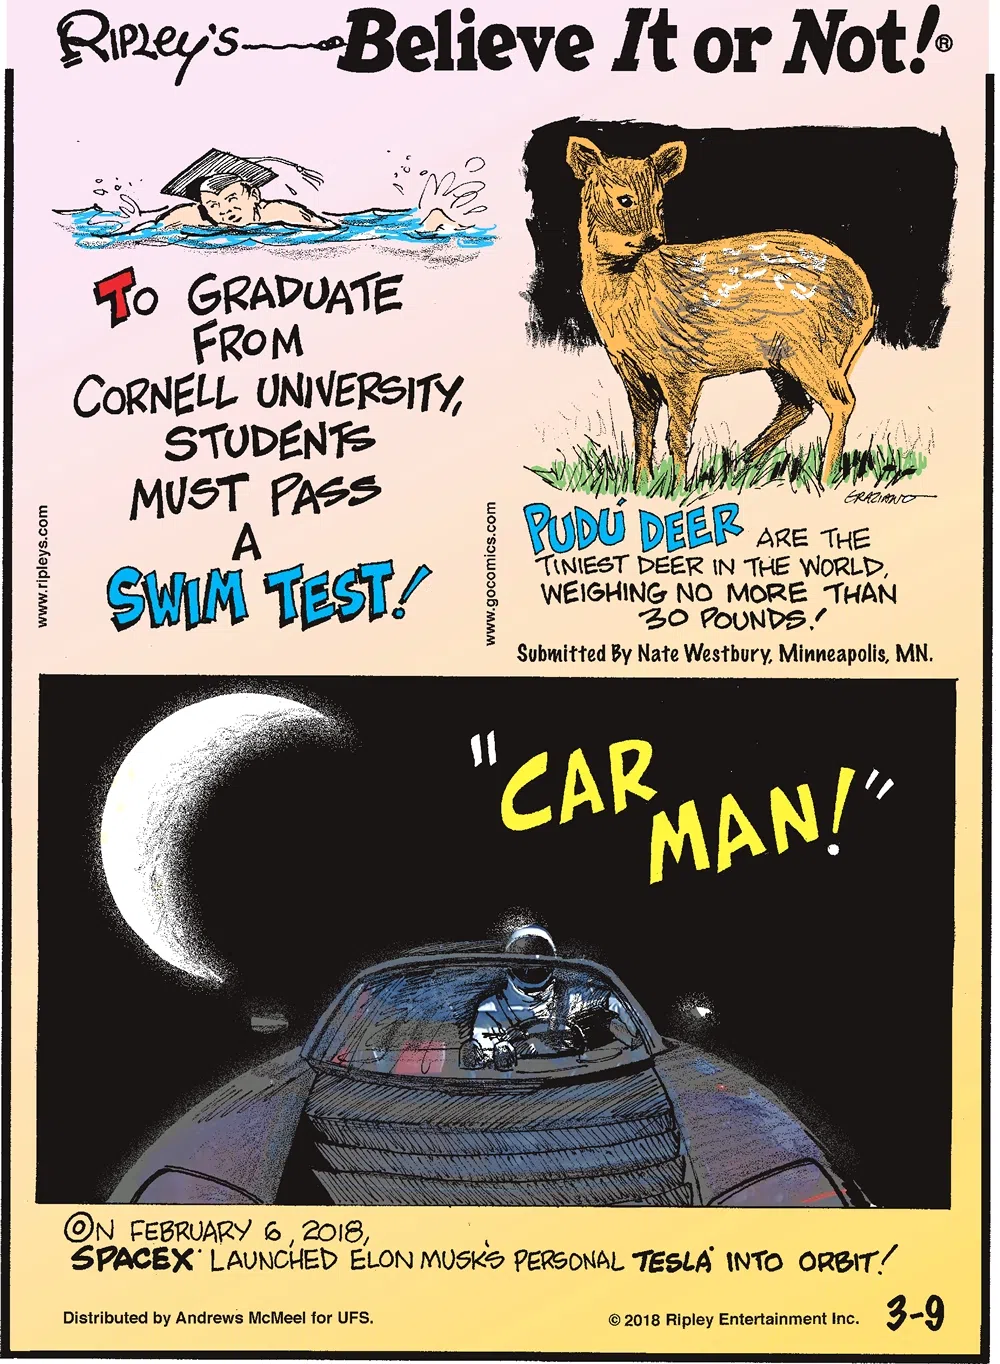 To graduate from Cornell University, students must pass a swim test!-------------------- Pudu deer are the tiniest deer in the world, weighing no more than 30 pounds! Submitted by Nate Westbury, Minneapolis, MN.-------------------- On February 6, 2018, SpaceX launched Elon Musk's personal Tesla into orbit!